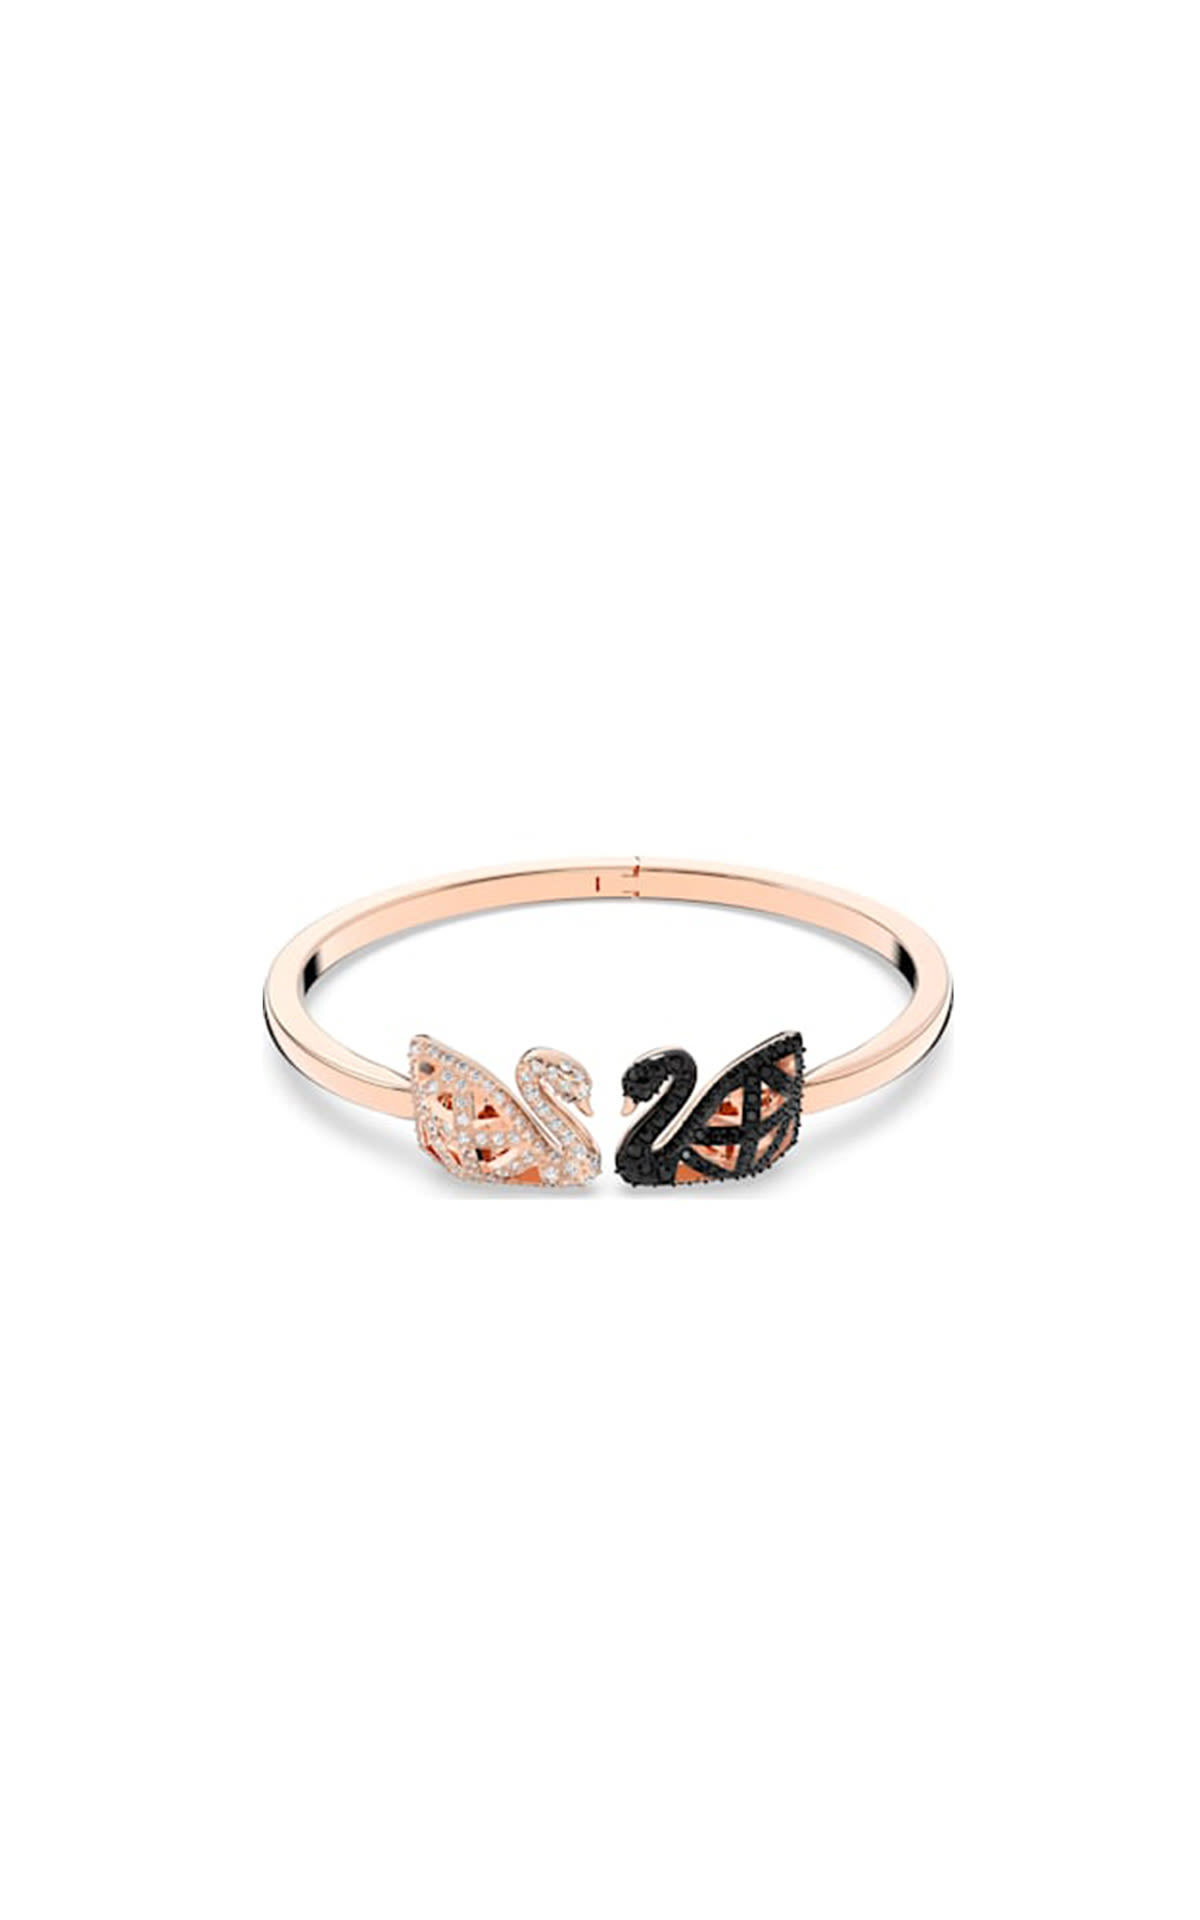 Swaroovski Swan open bangle with clear and black crystal